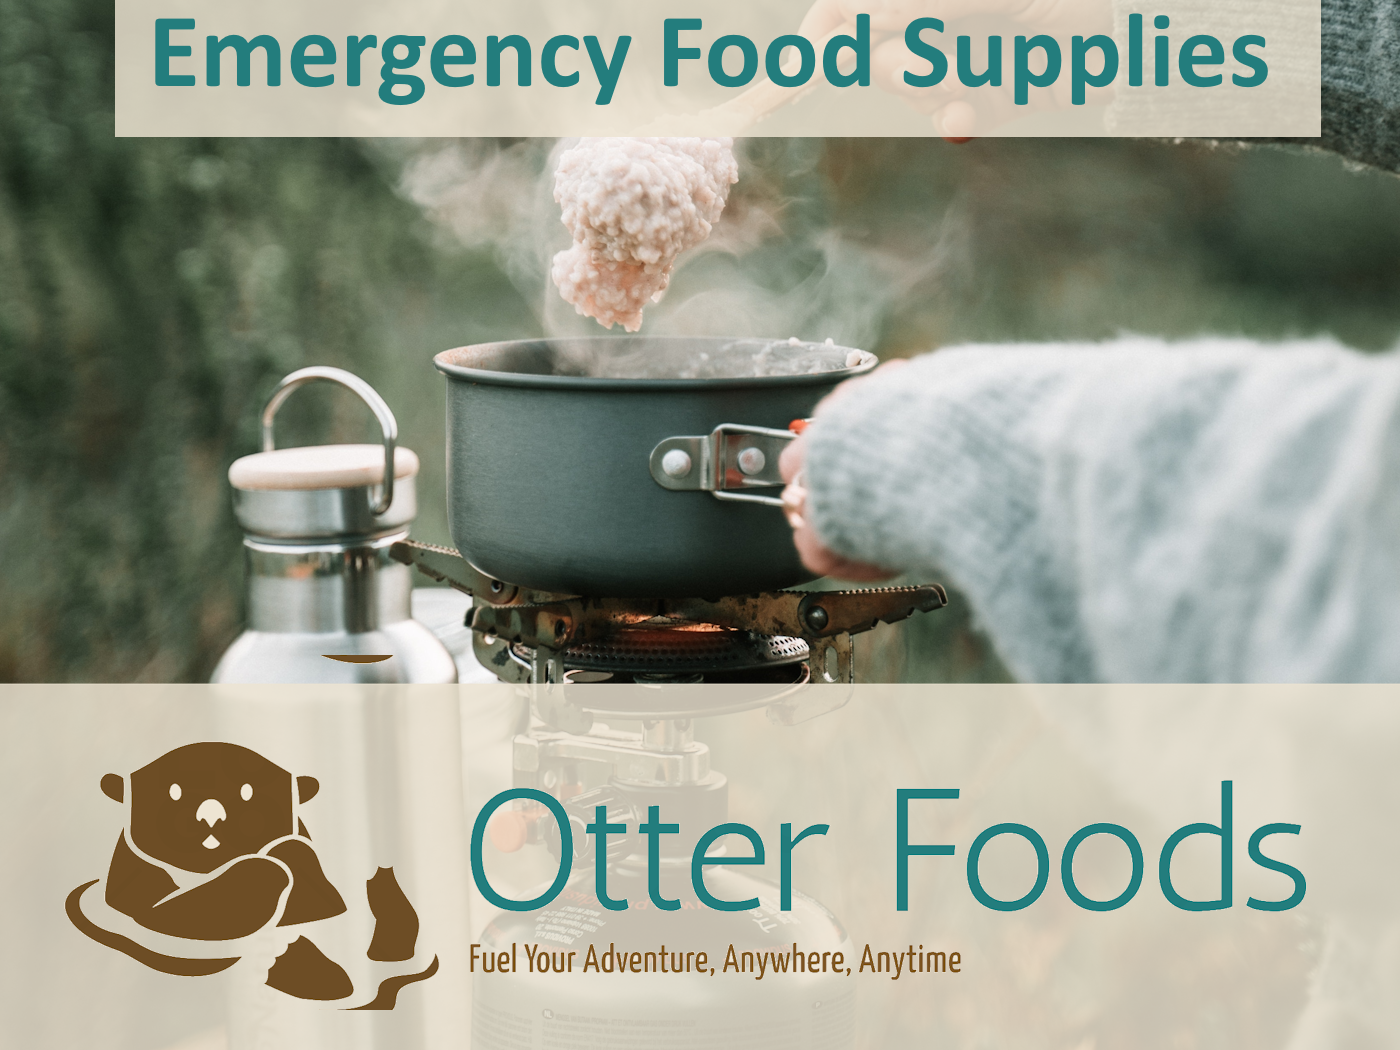 shelf-stable foods for emergency